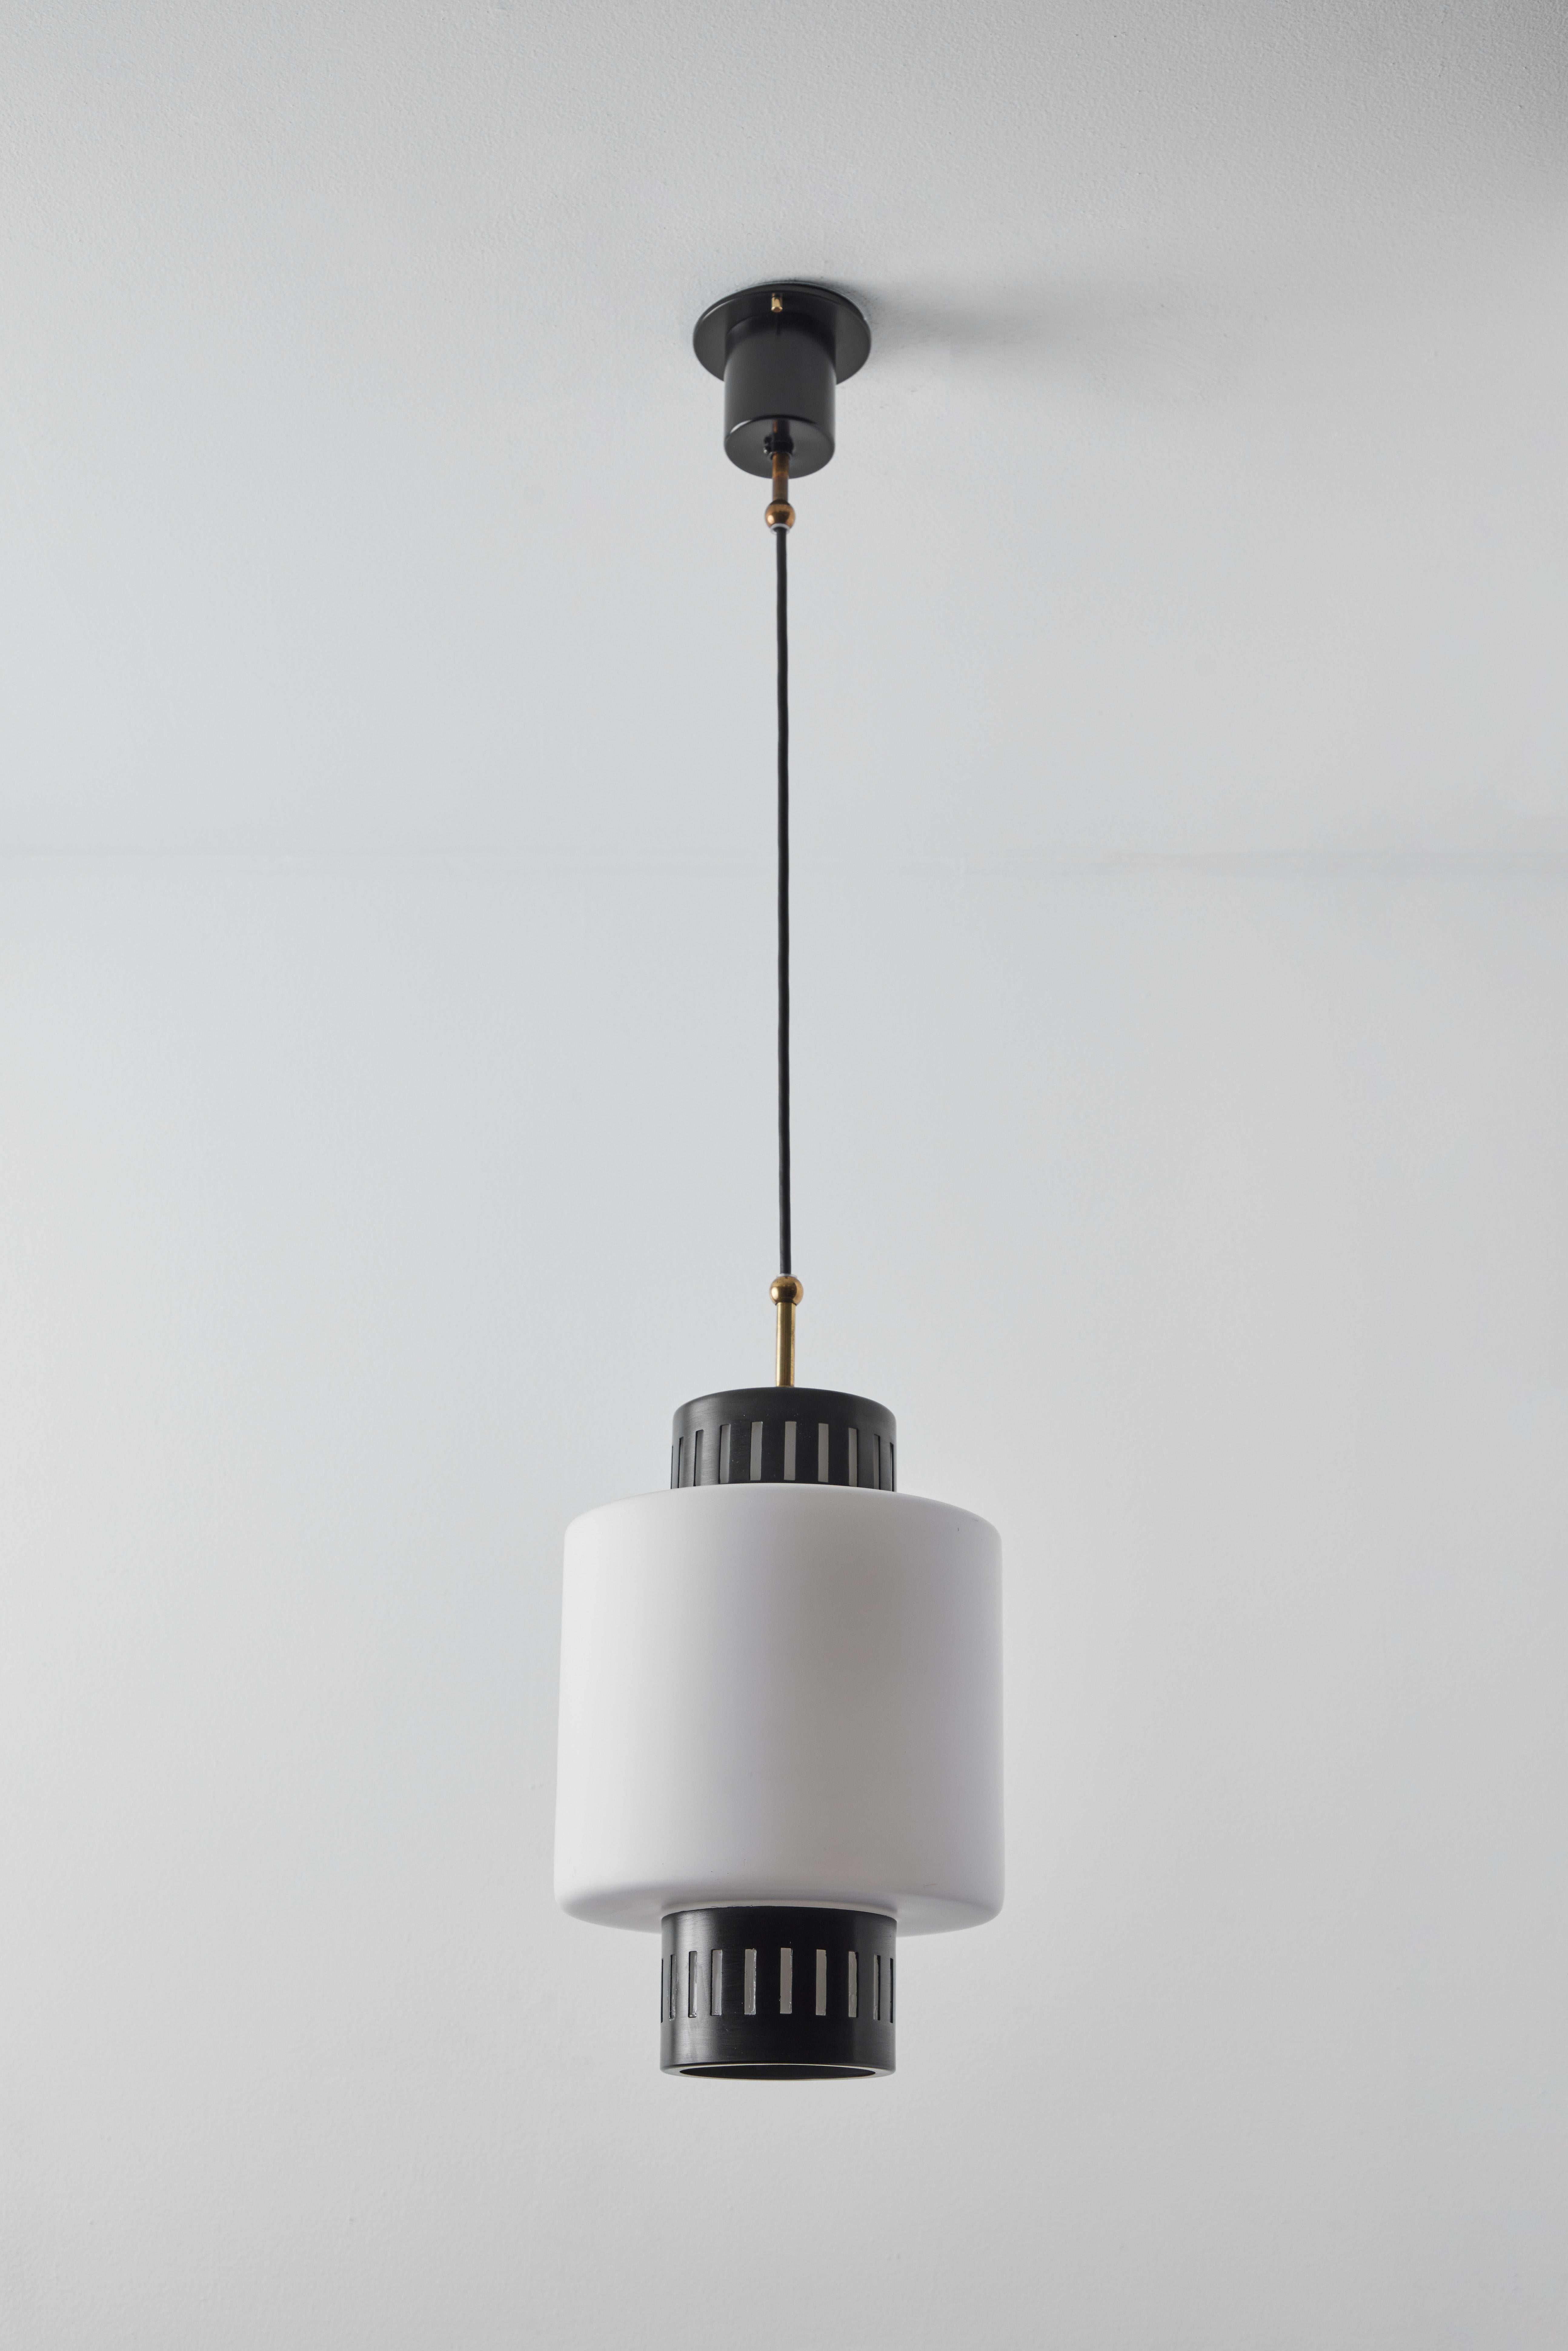 Large 1950s Stilnovo glass and metal pendant. A quintessentially 1950s Italian design executed in matte finish opaline glass and painted metal with a custom fabricated architectural ceiling canopy for mounting over a standard American J-box. A